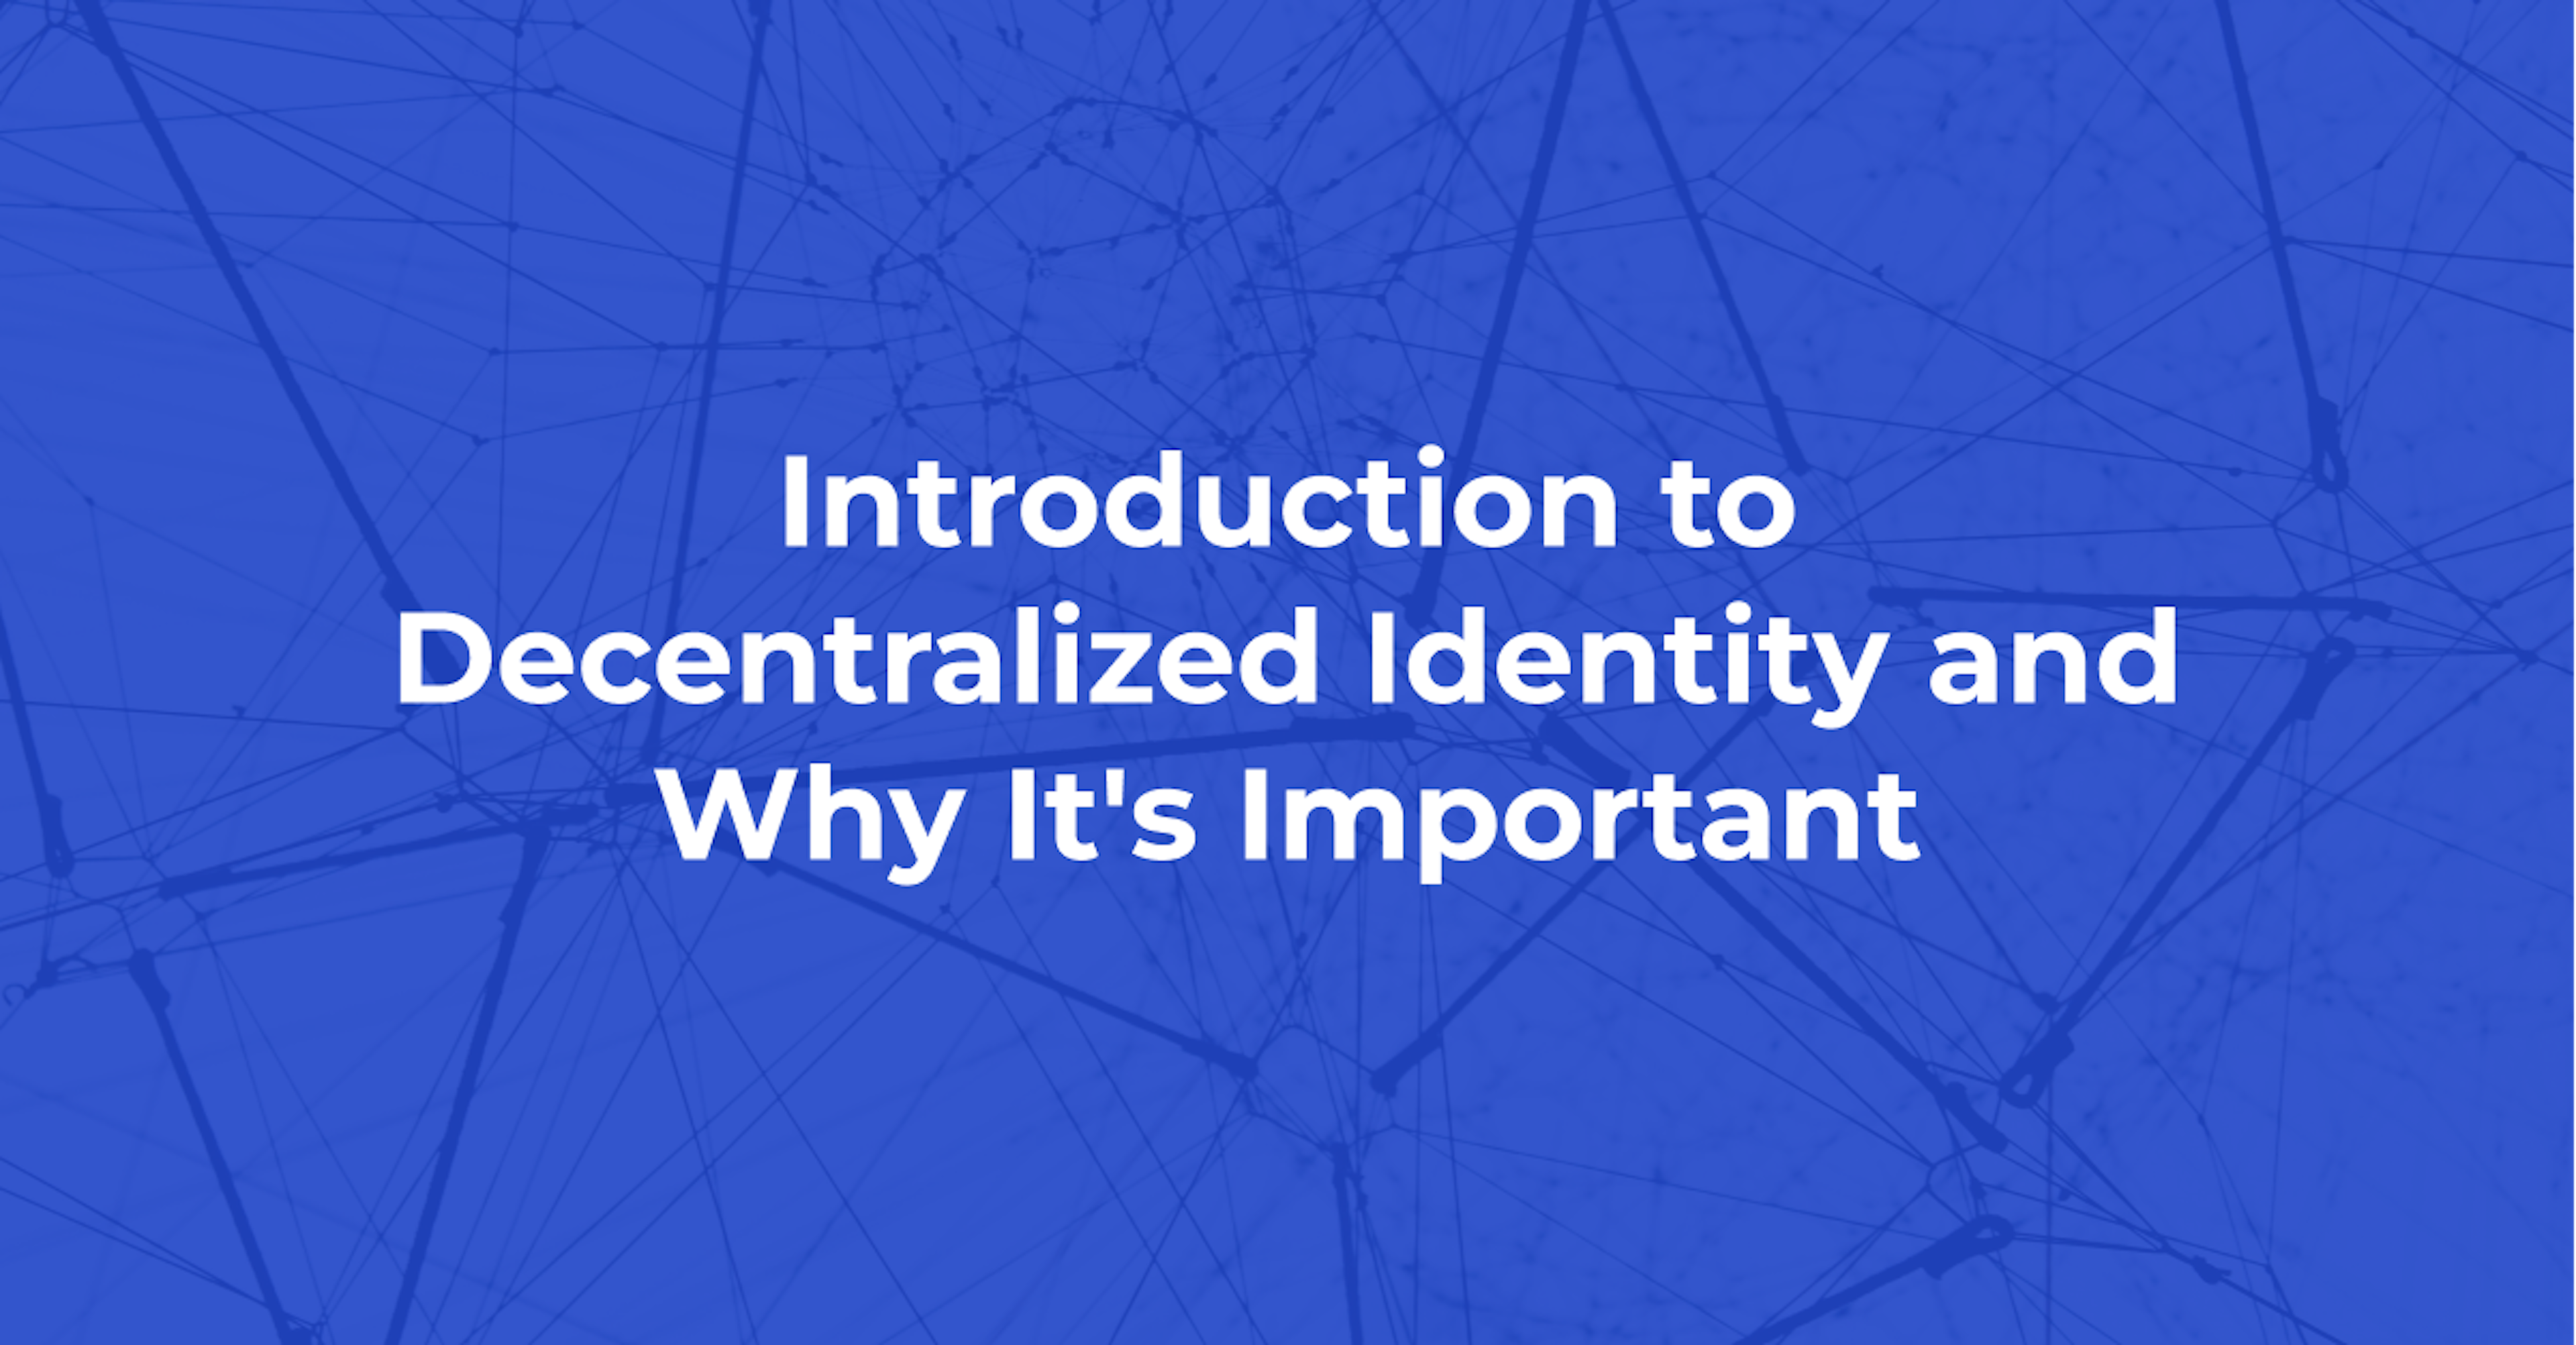 Introduction to Decentralized Identity and Why It's Important